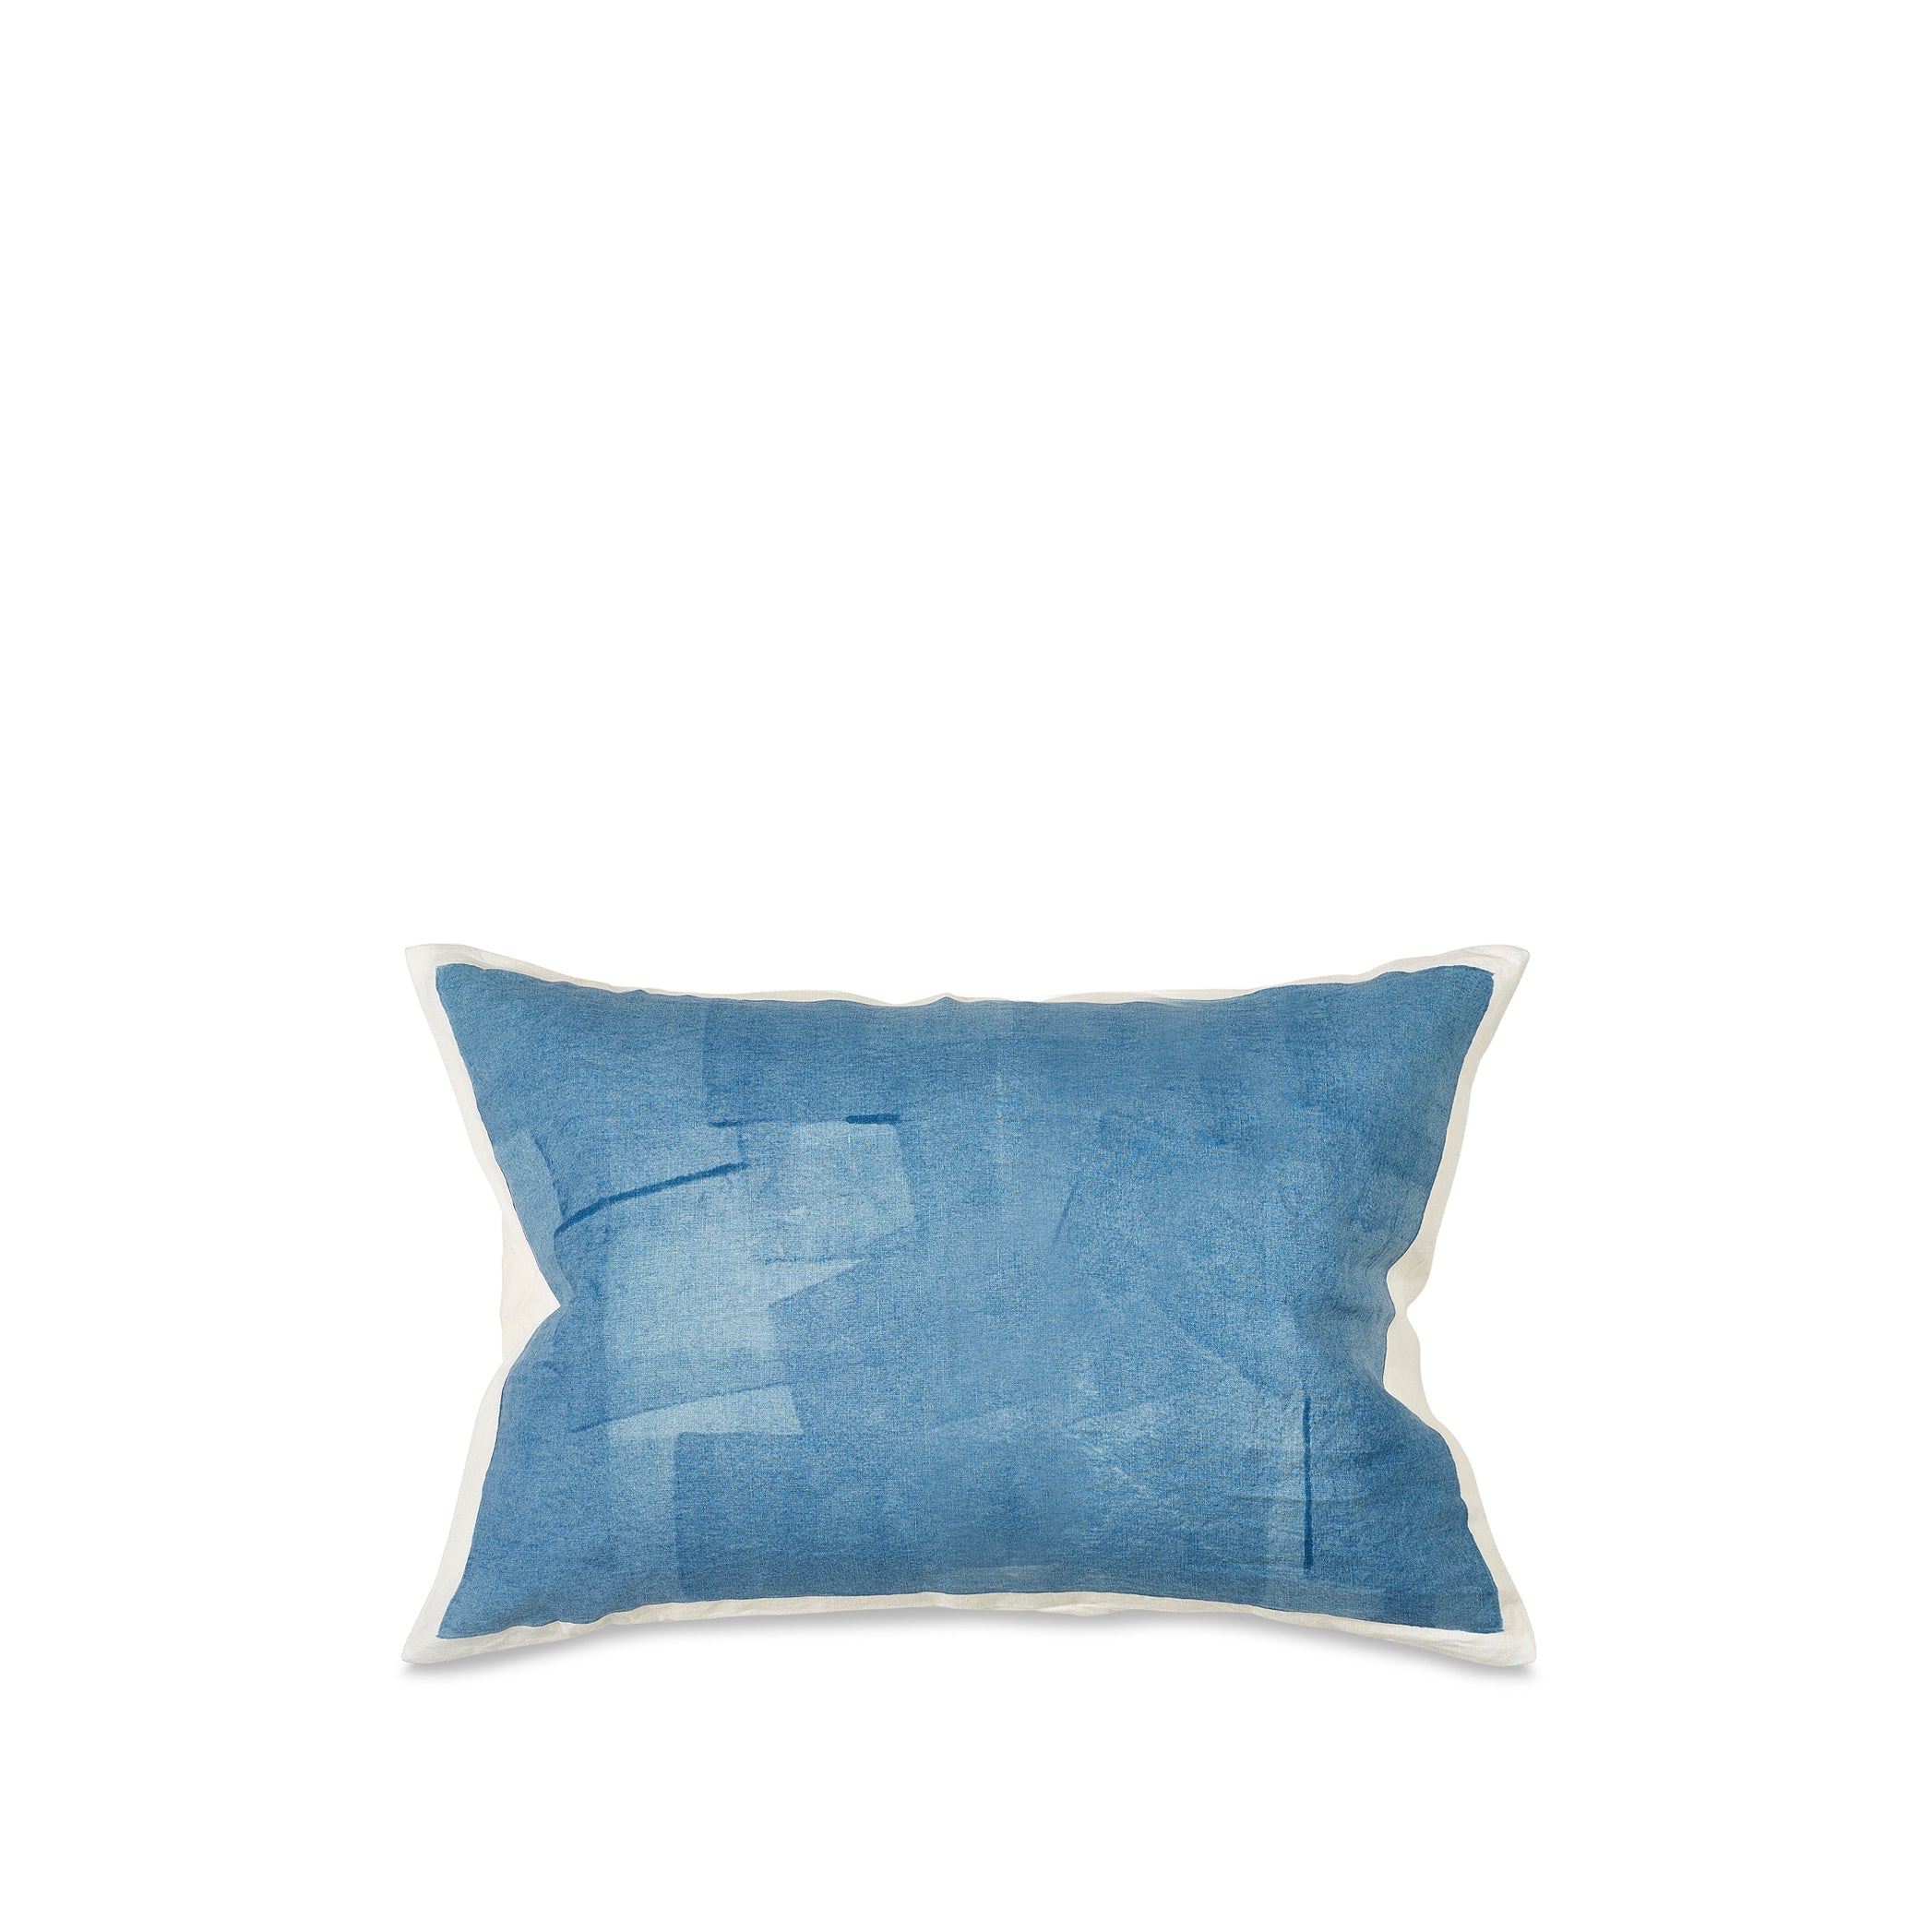 Hand Painted Linen Cushion in Sky Blue, 60cm x 40cm